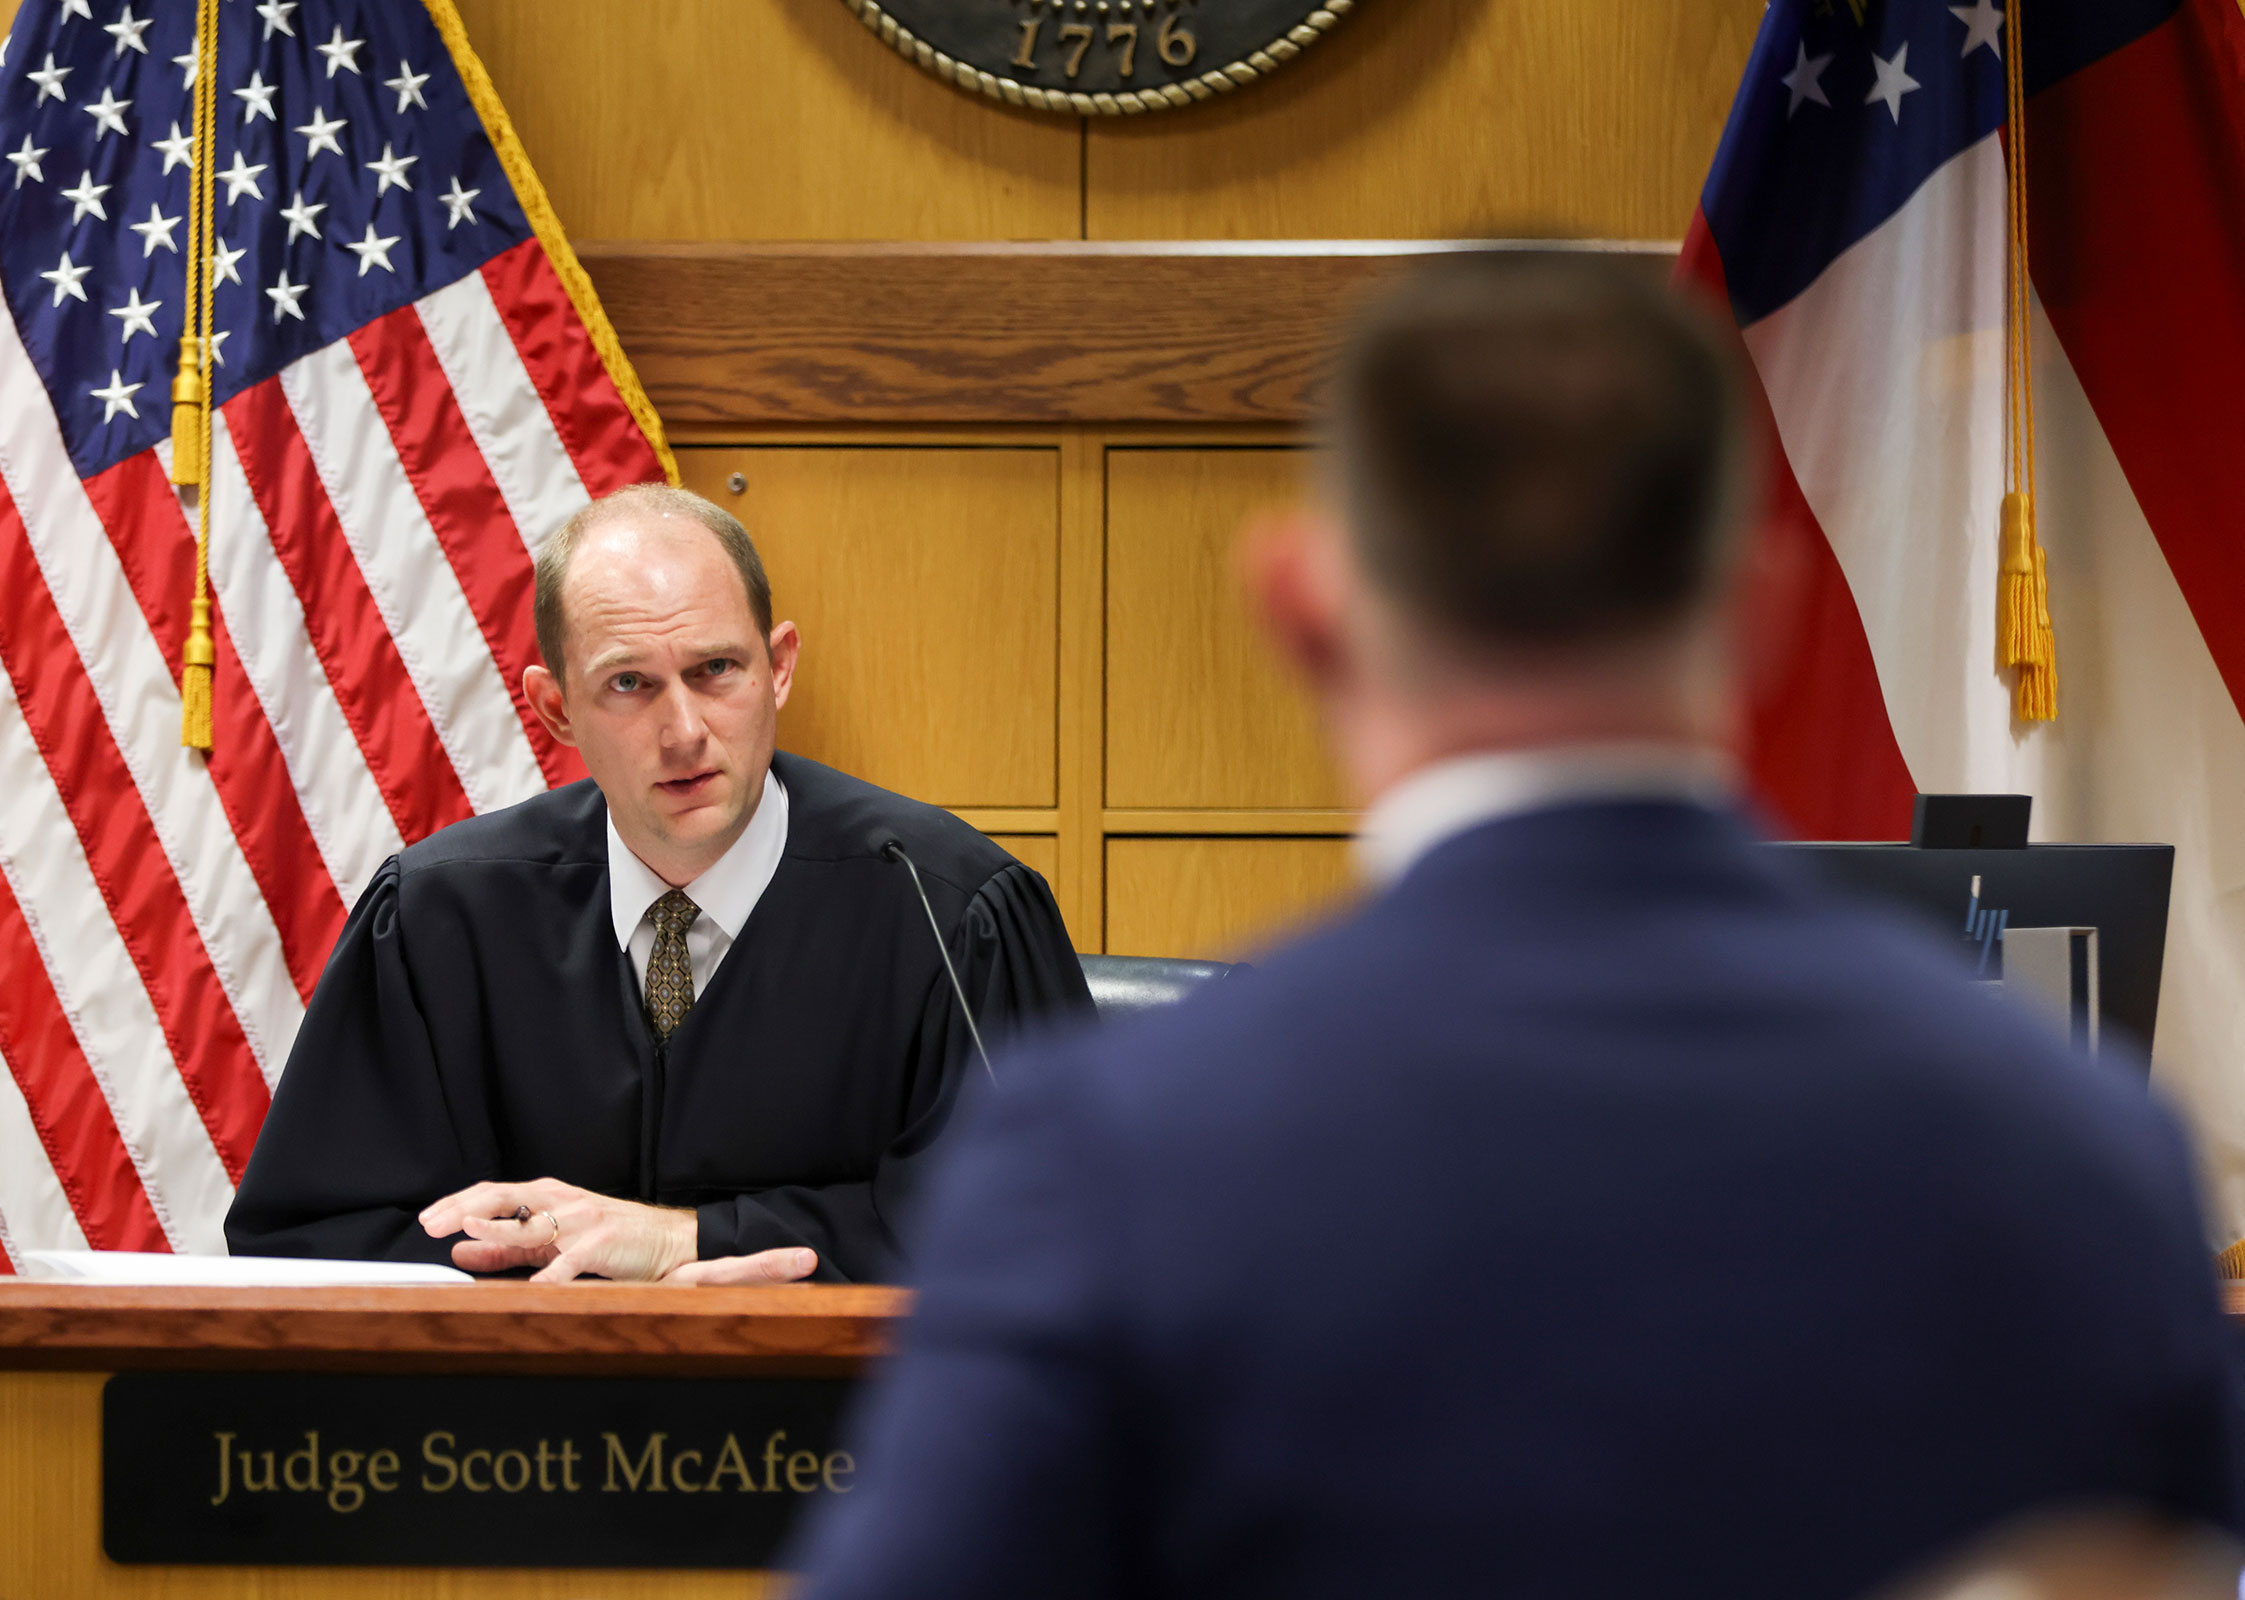 Judge Scott McAfee listens to prosecutor Will Wooten during a hearing in the case of the State of Georgia v. Donald John Trump on February 13, 2024 at the Fulton County Courthouse in Atlanta, Georgia.